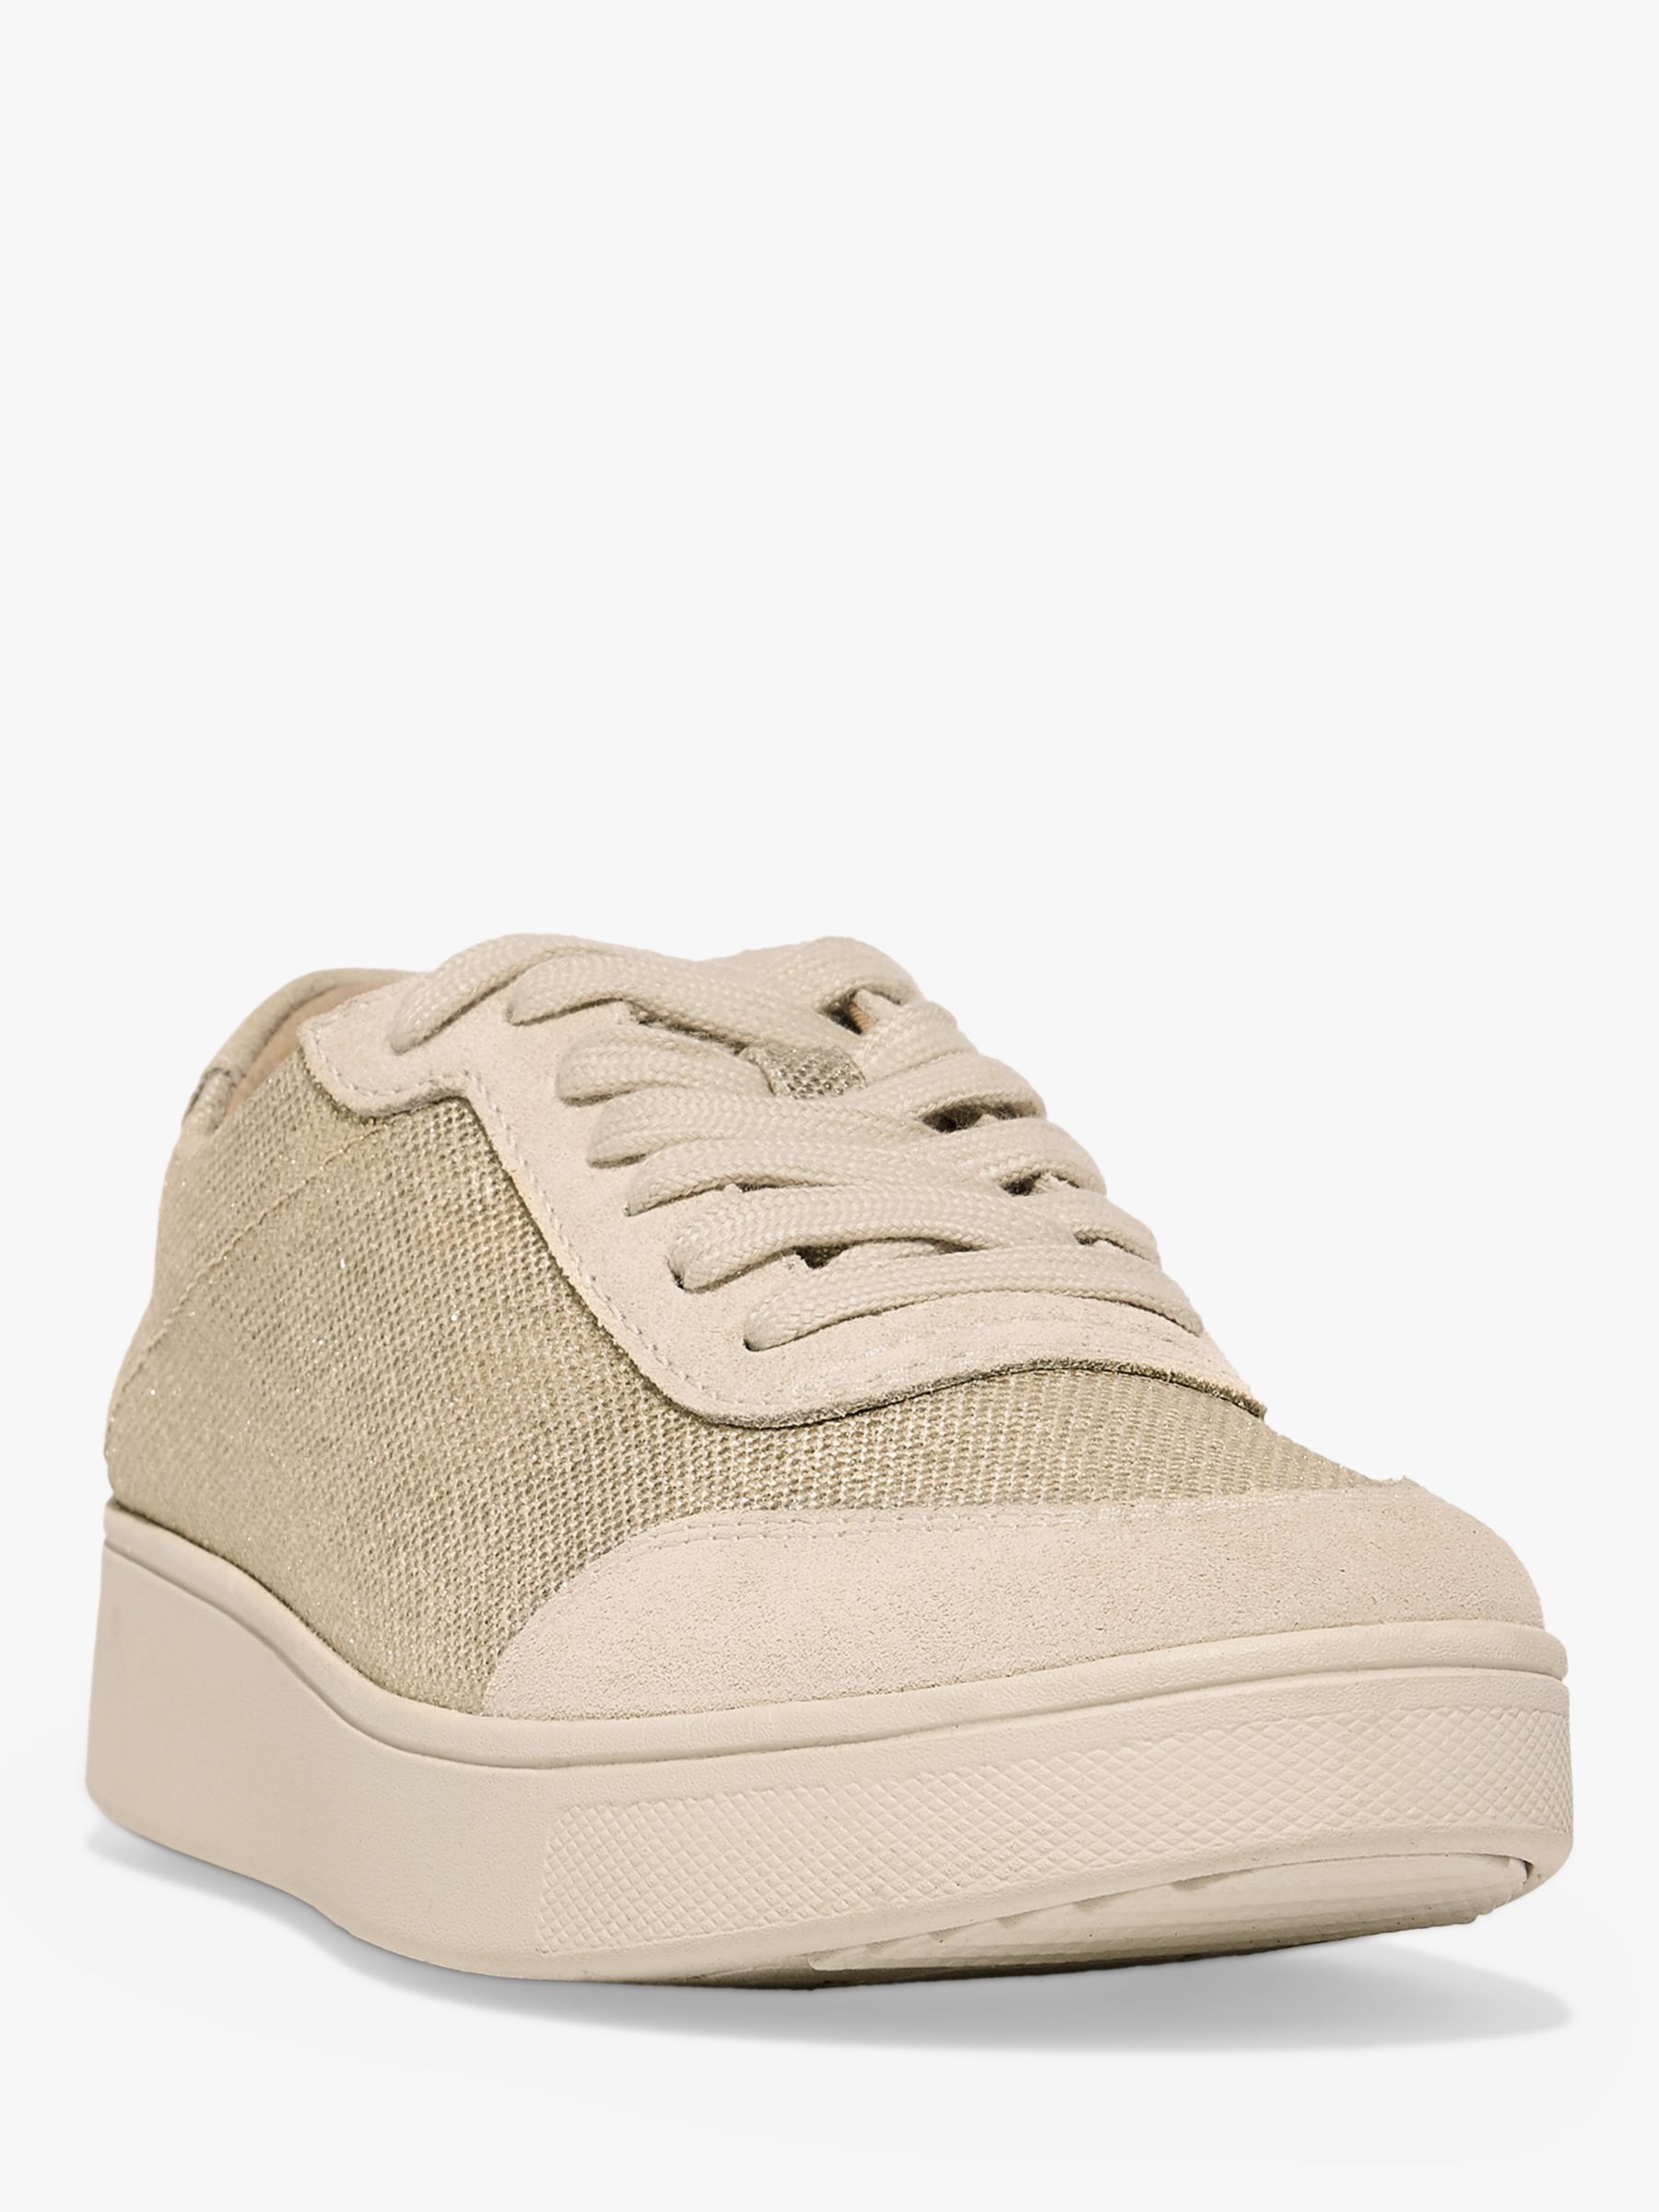 Buy FitFlop Rally Metallic Leather Blend Trainers, Platino Online at johnlewis.com